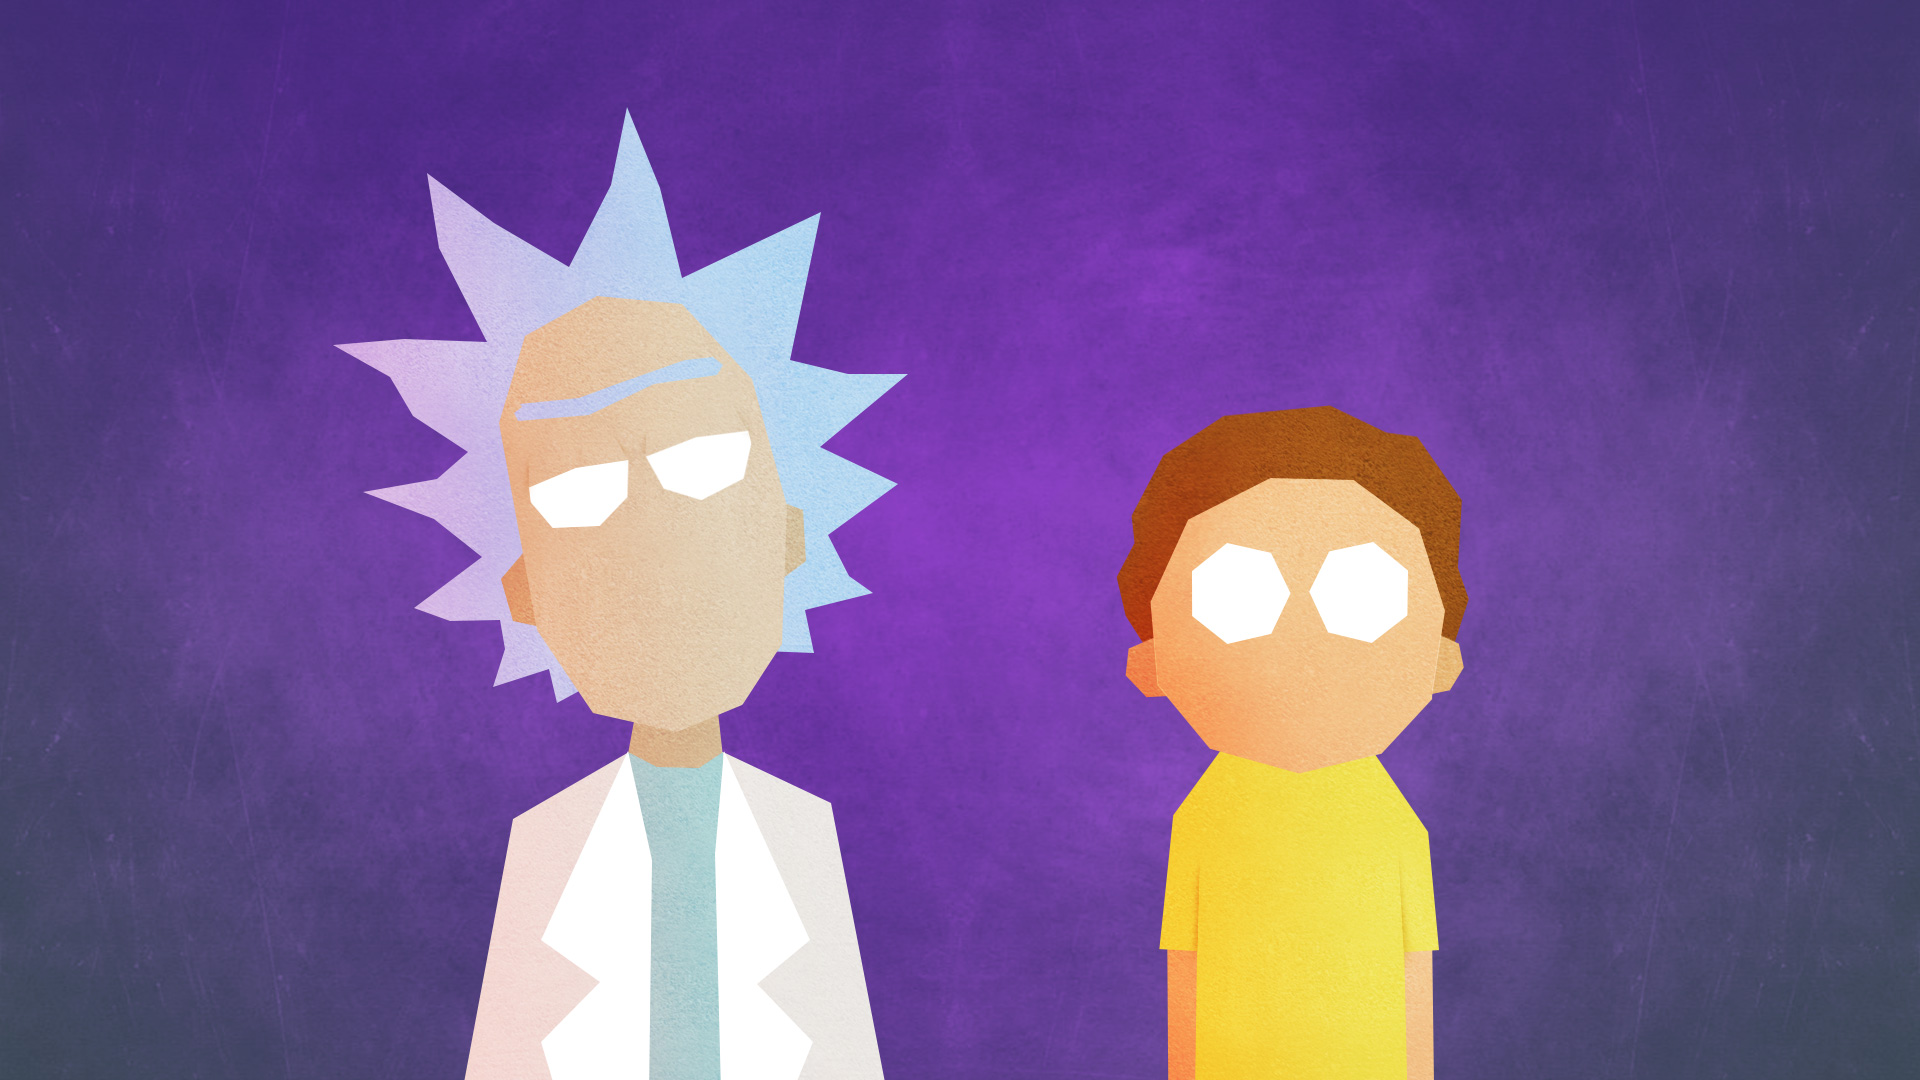 Rick And Morty Wallpapers Pictures Images